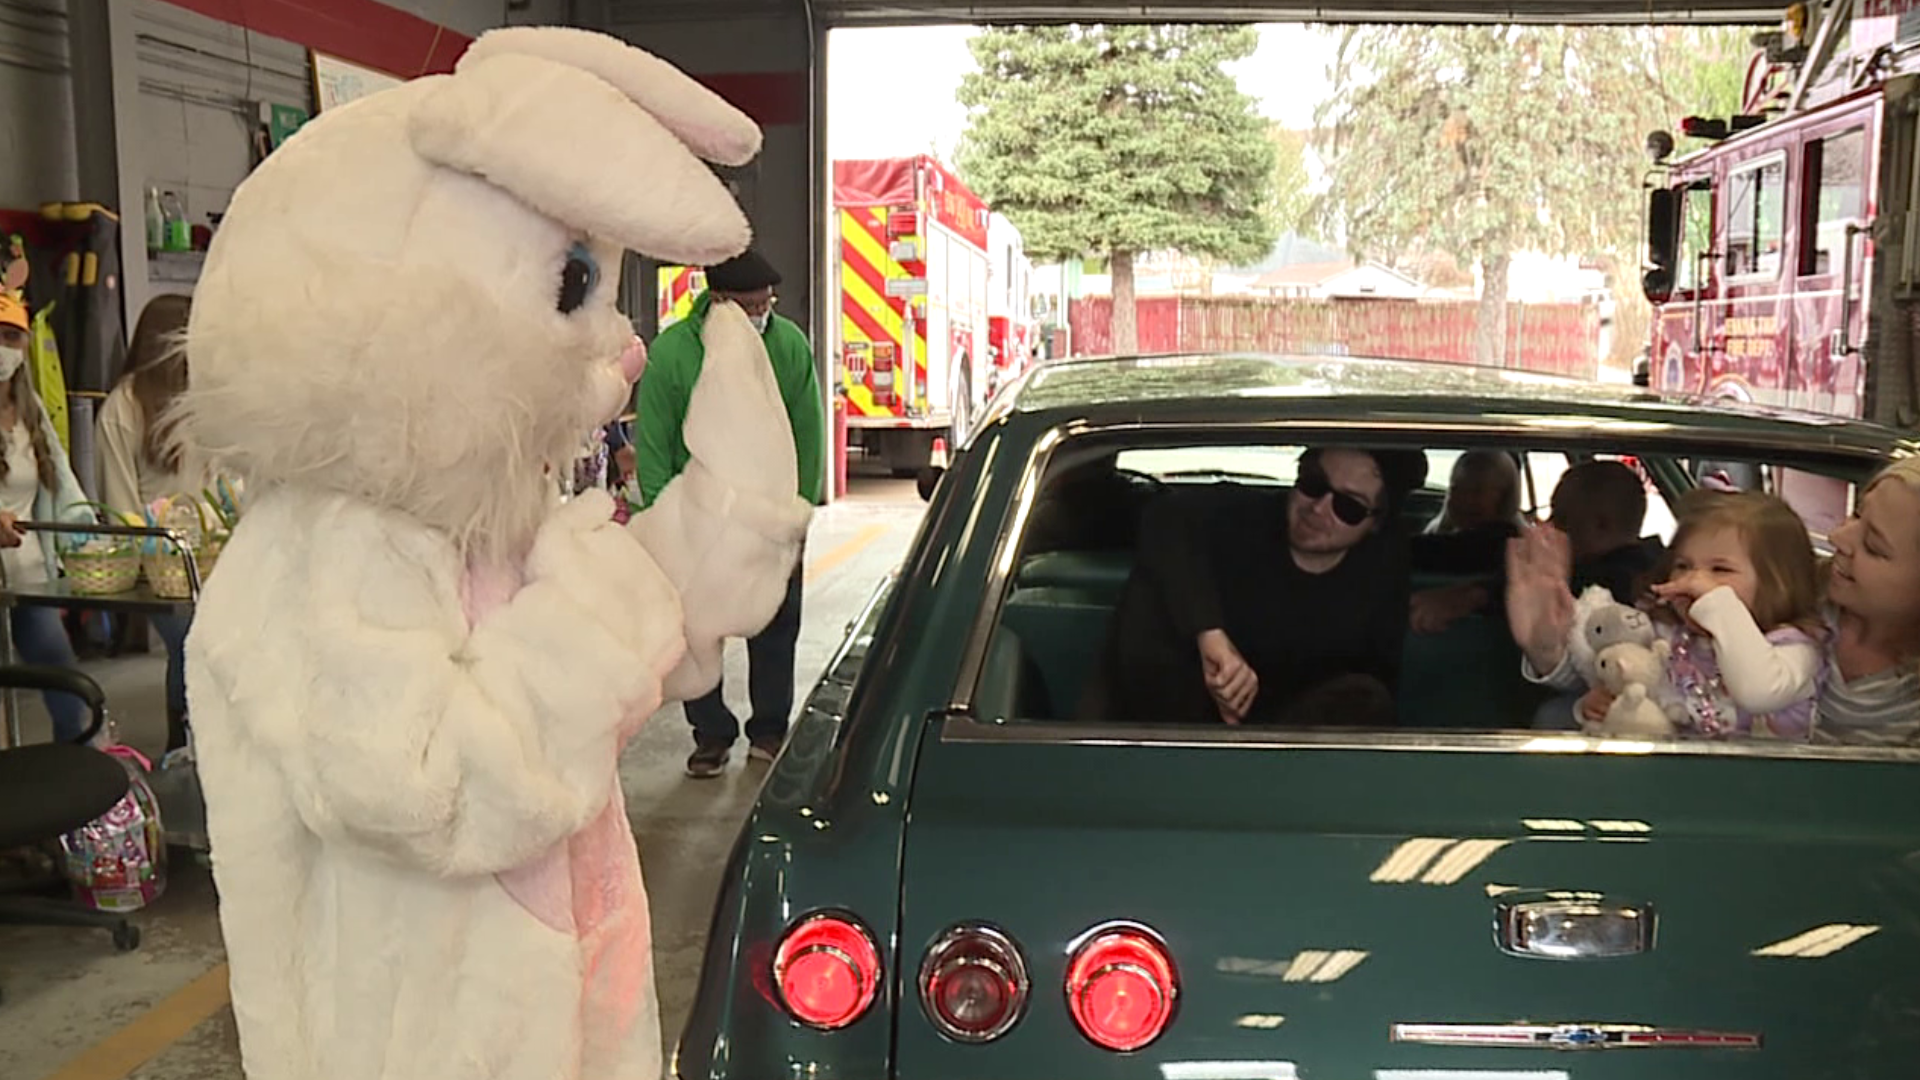 Families drove through the fire hall to get a basket full of Easter candy.